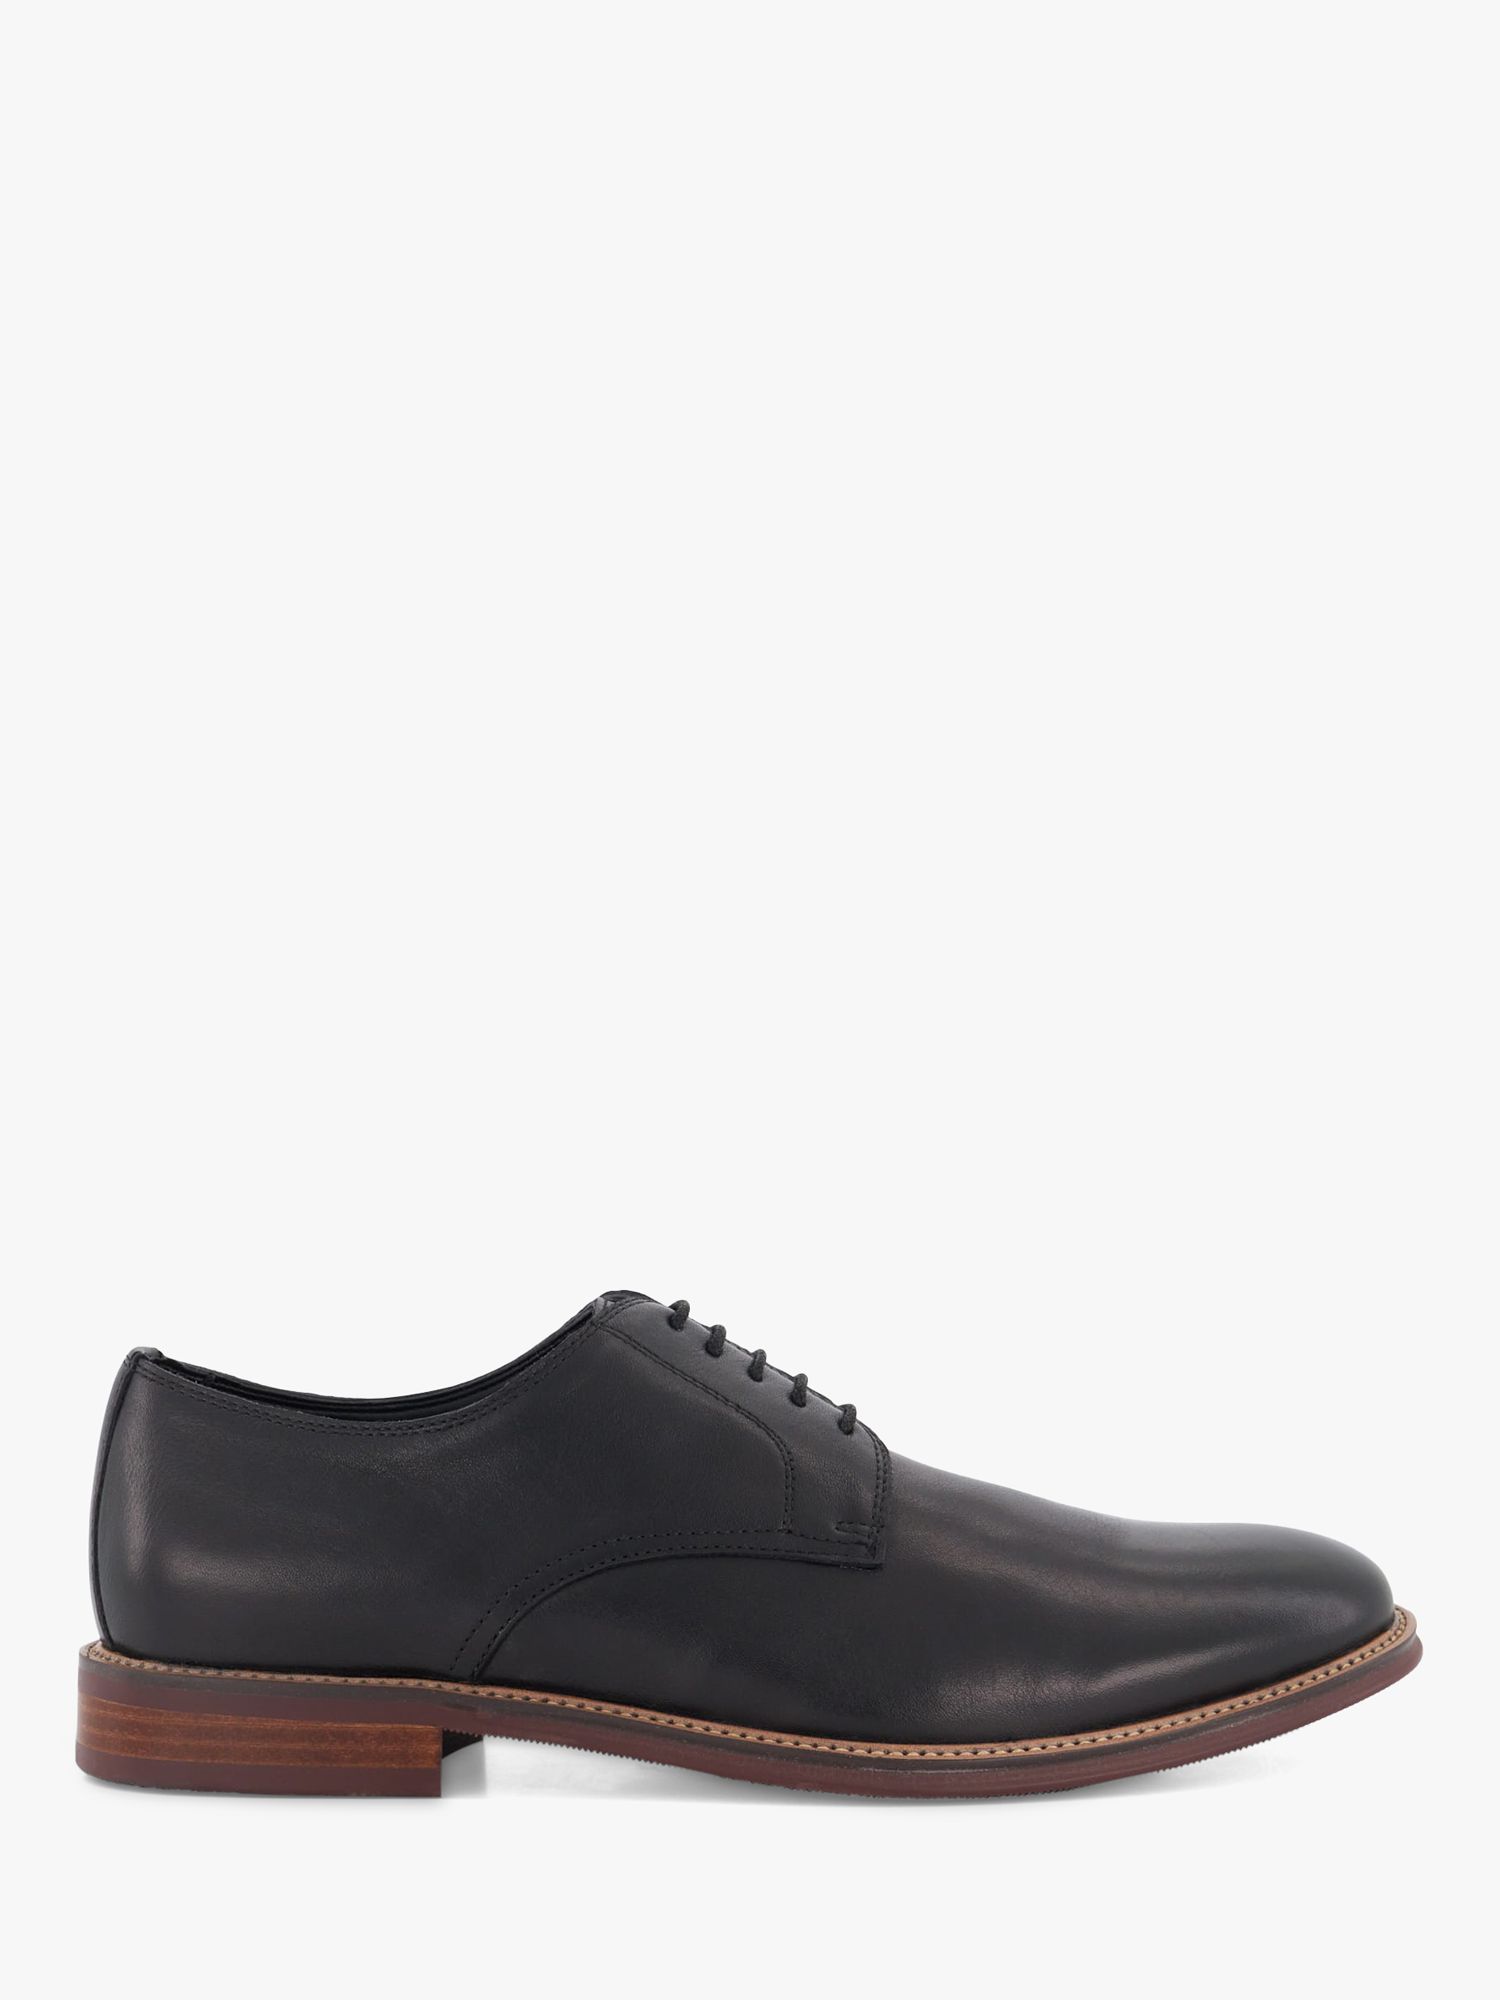 Dune Stanley Leather Derby Shoes, Black-leather, EU40